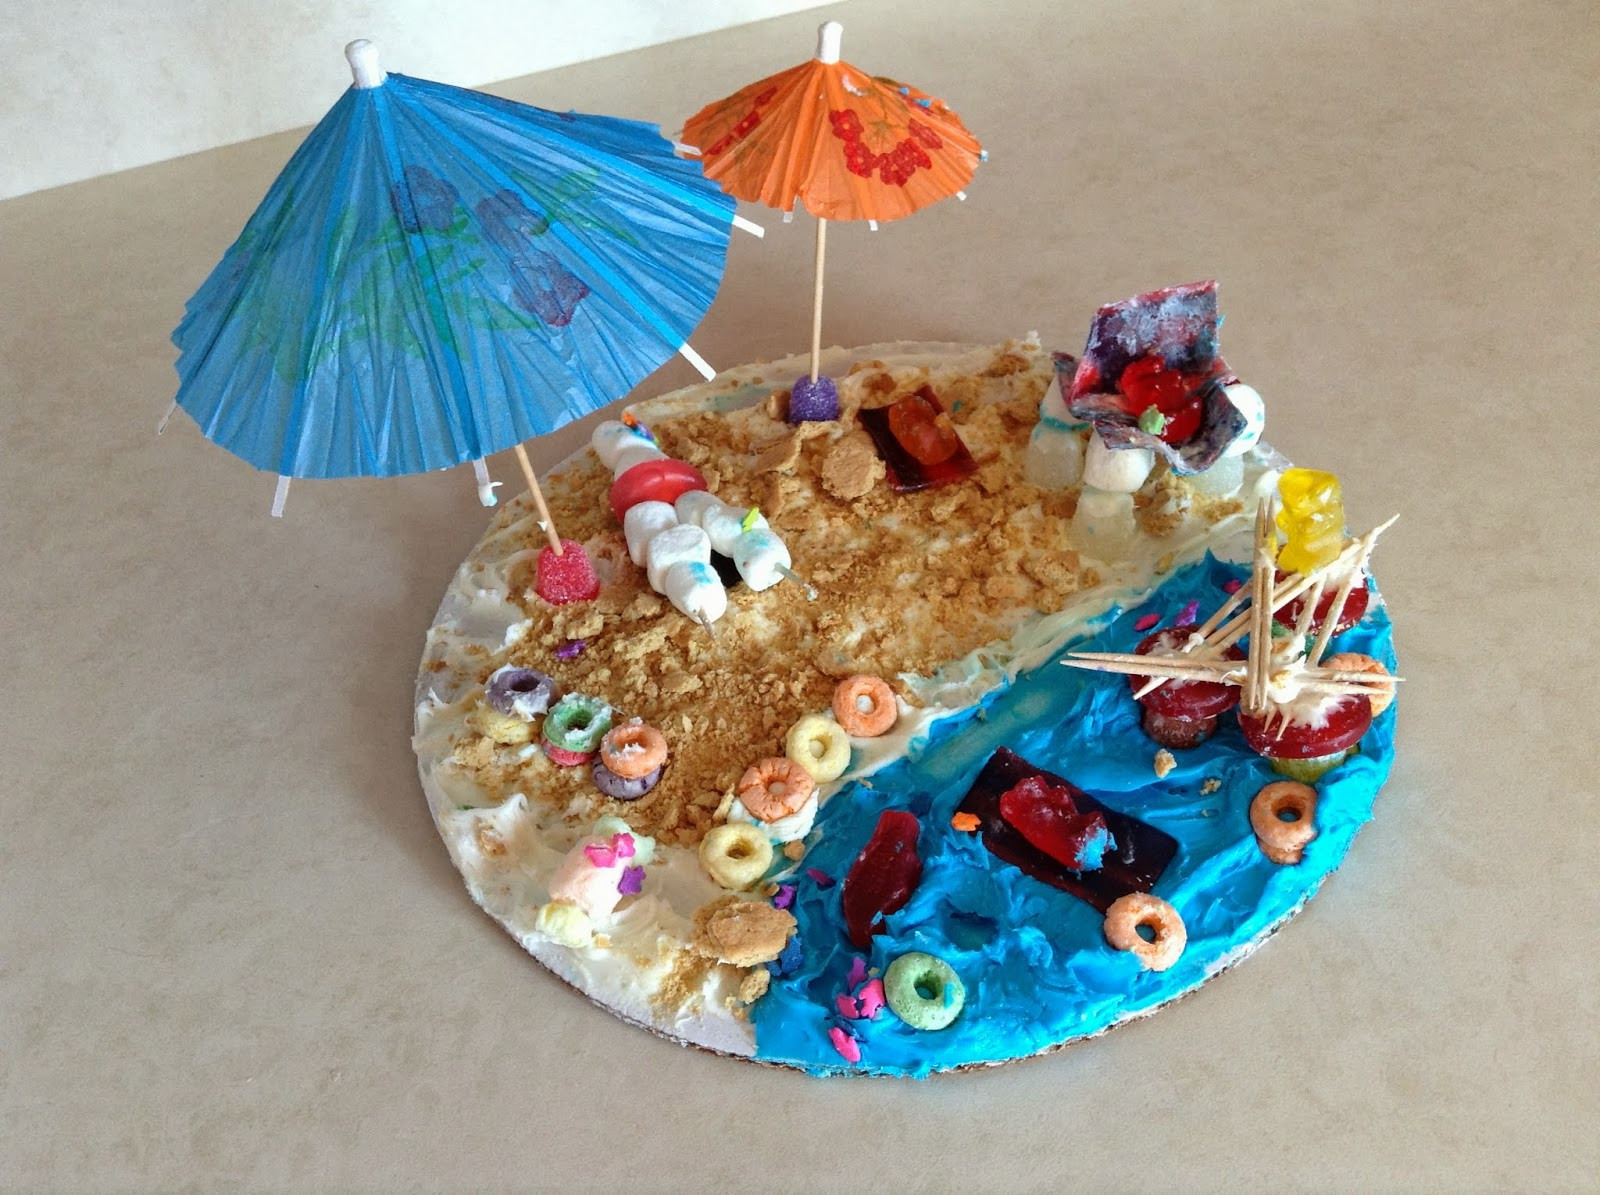 Arts And Crafts Ideas For Adults
 Holly s Arts and Crafts Corner Summer Recap Independent